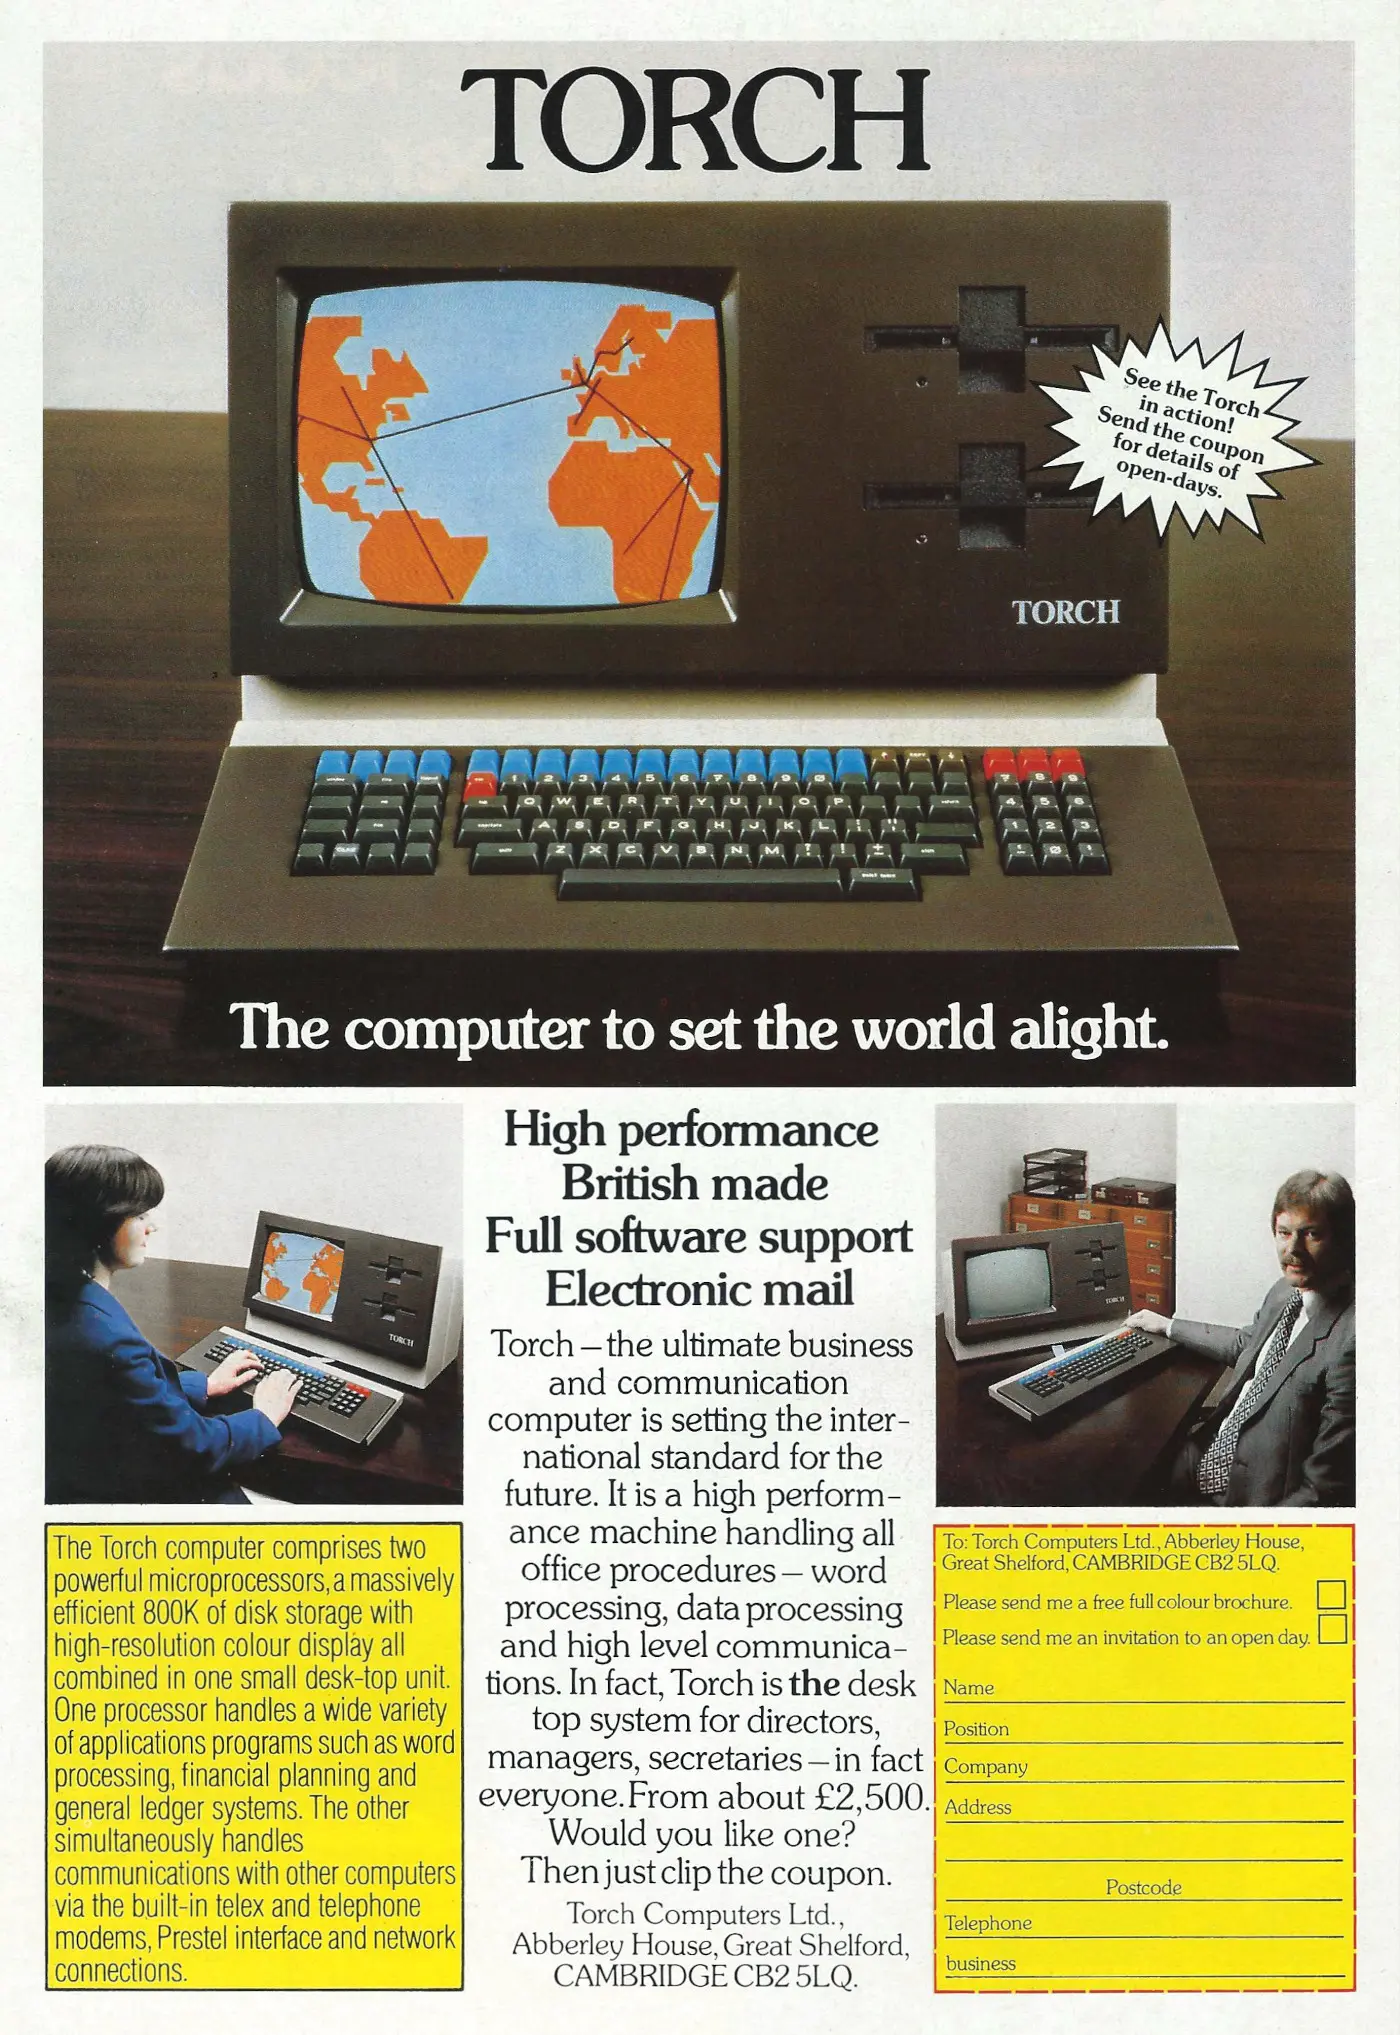 Torch Advert: Torch - The Computer to Set the World Alight, from Micro Decision, May 1982